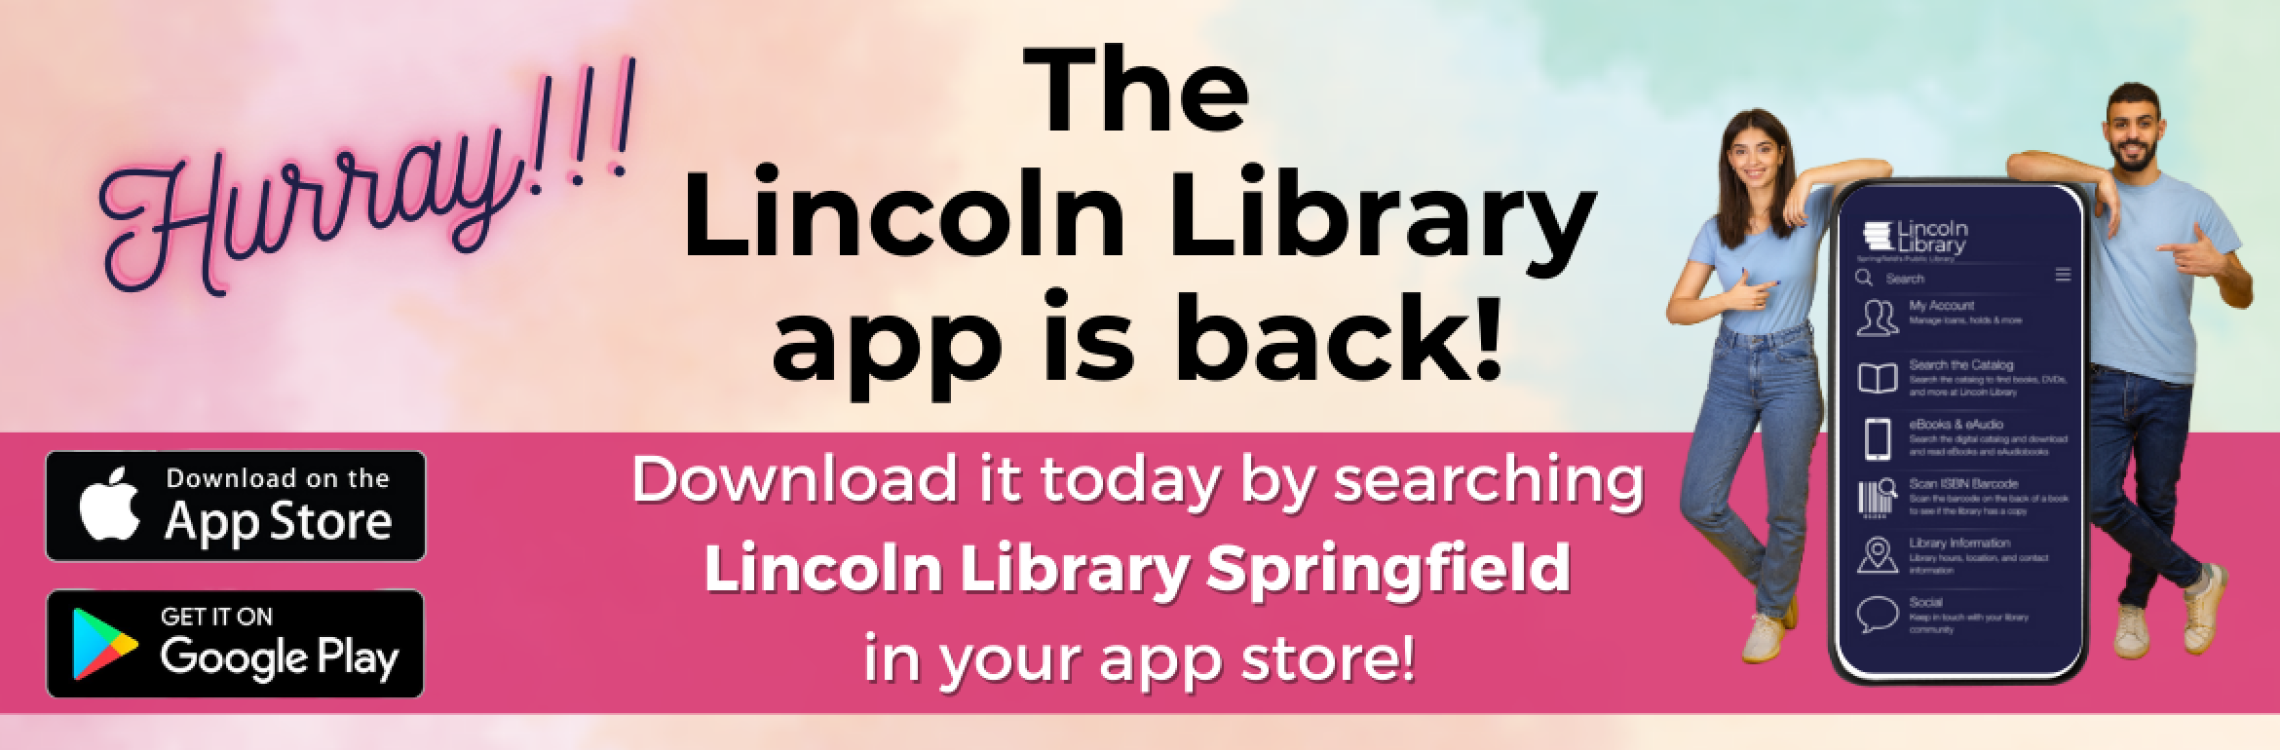 The Lincoln Library app is back! Download it by searching Lincoln Library Springfield in your app store. 